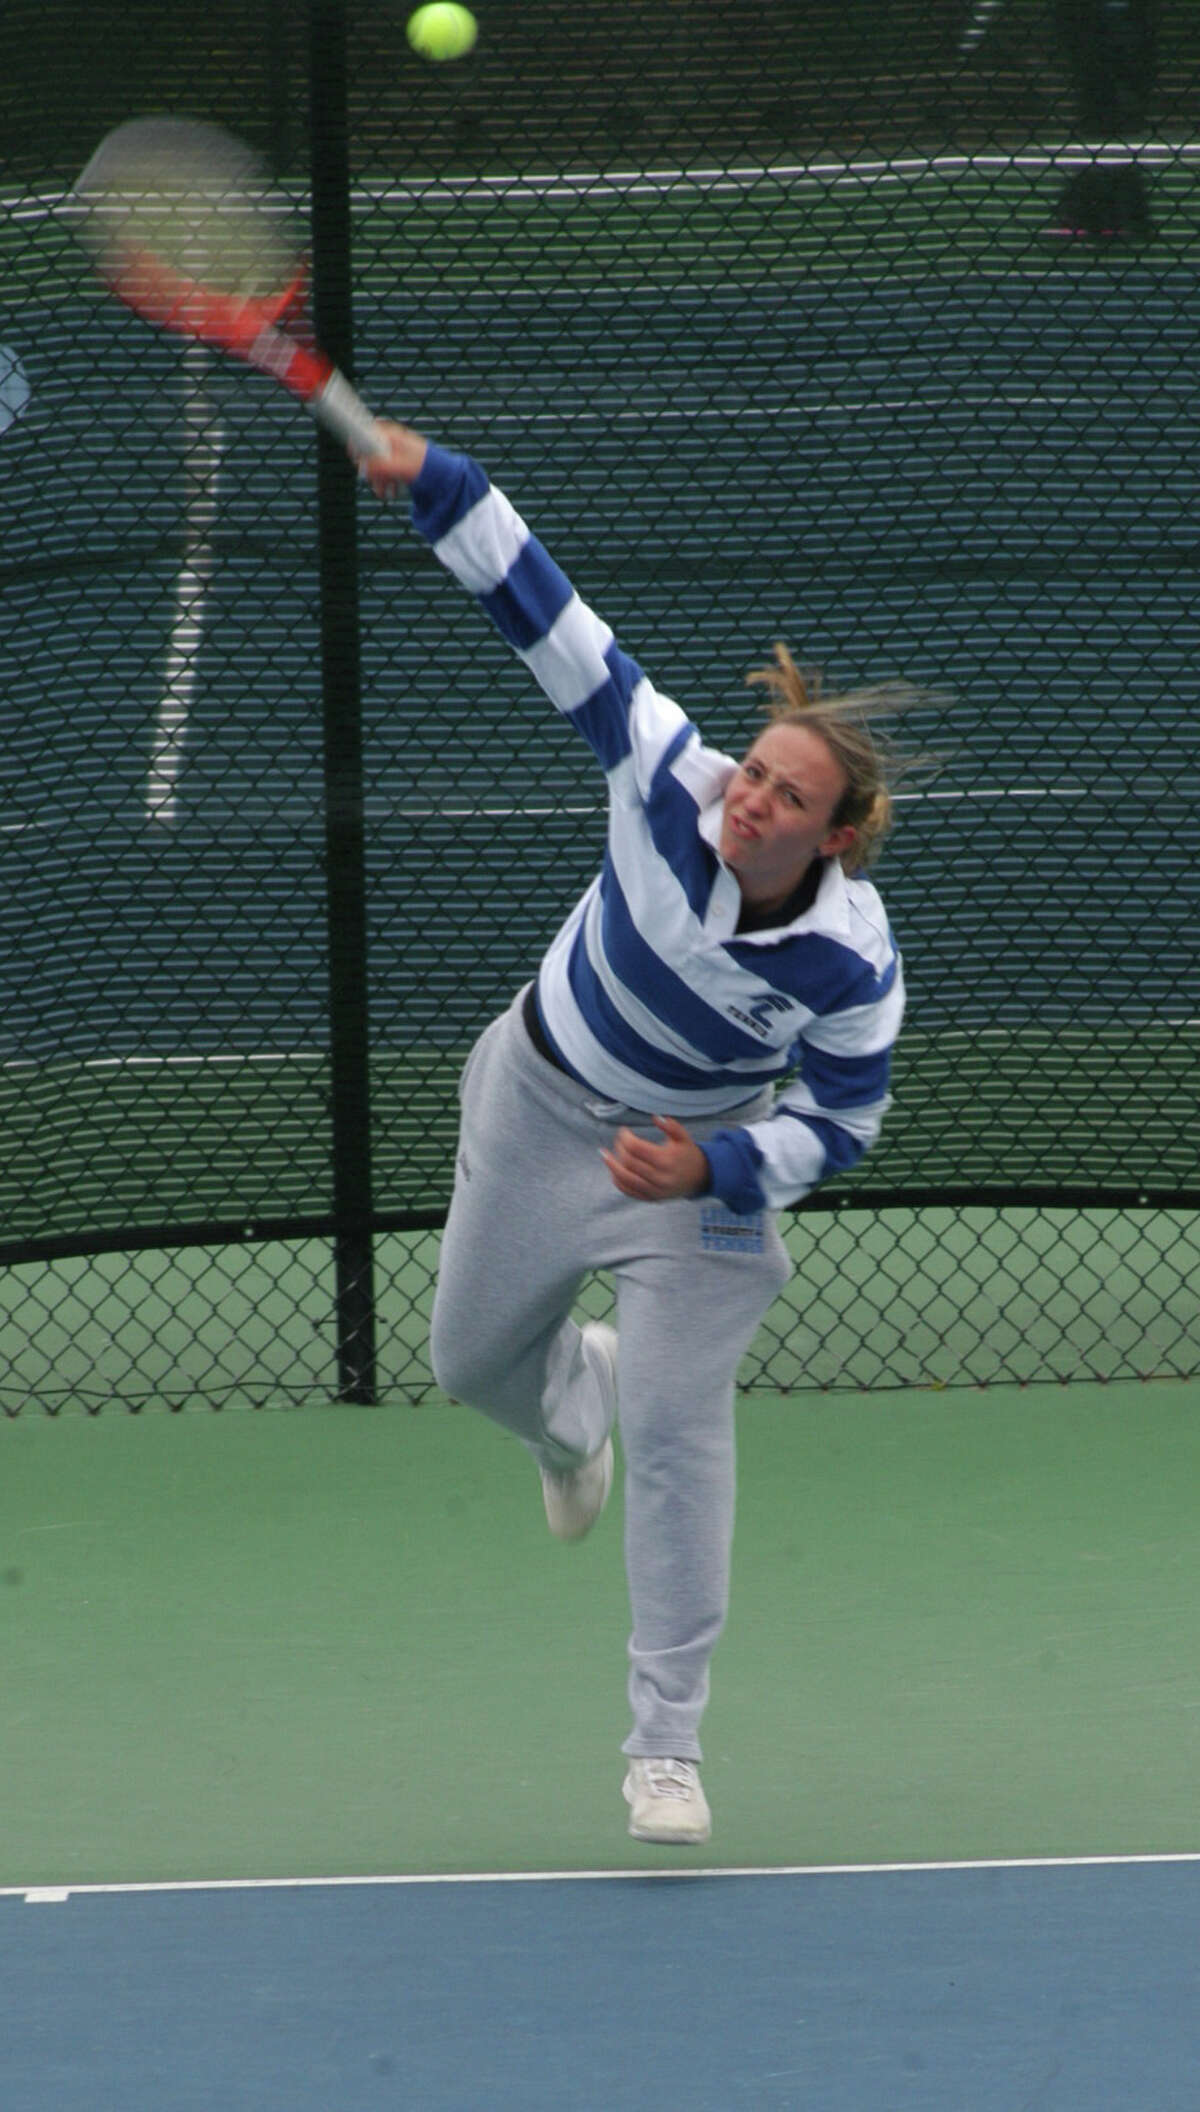 Fairfield Ludlowe junior Lindsey Evan returning a shot at first singles on Tuesday, April 29 in an FCIAC girls tennis match on the Falcons' courts. Ludlowe beat Warde 5-2. Evans won her match over Emily Simonds in straight sets 6-0, 6-0.